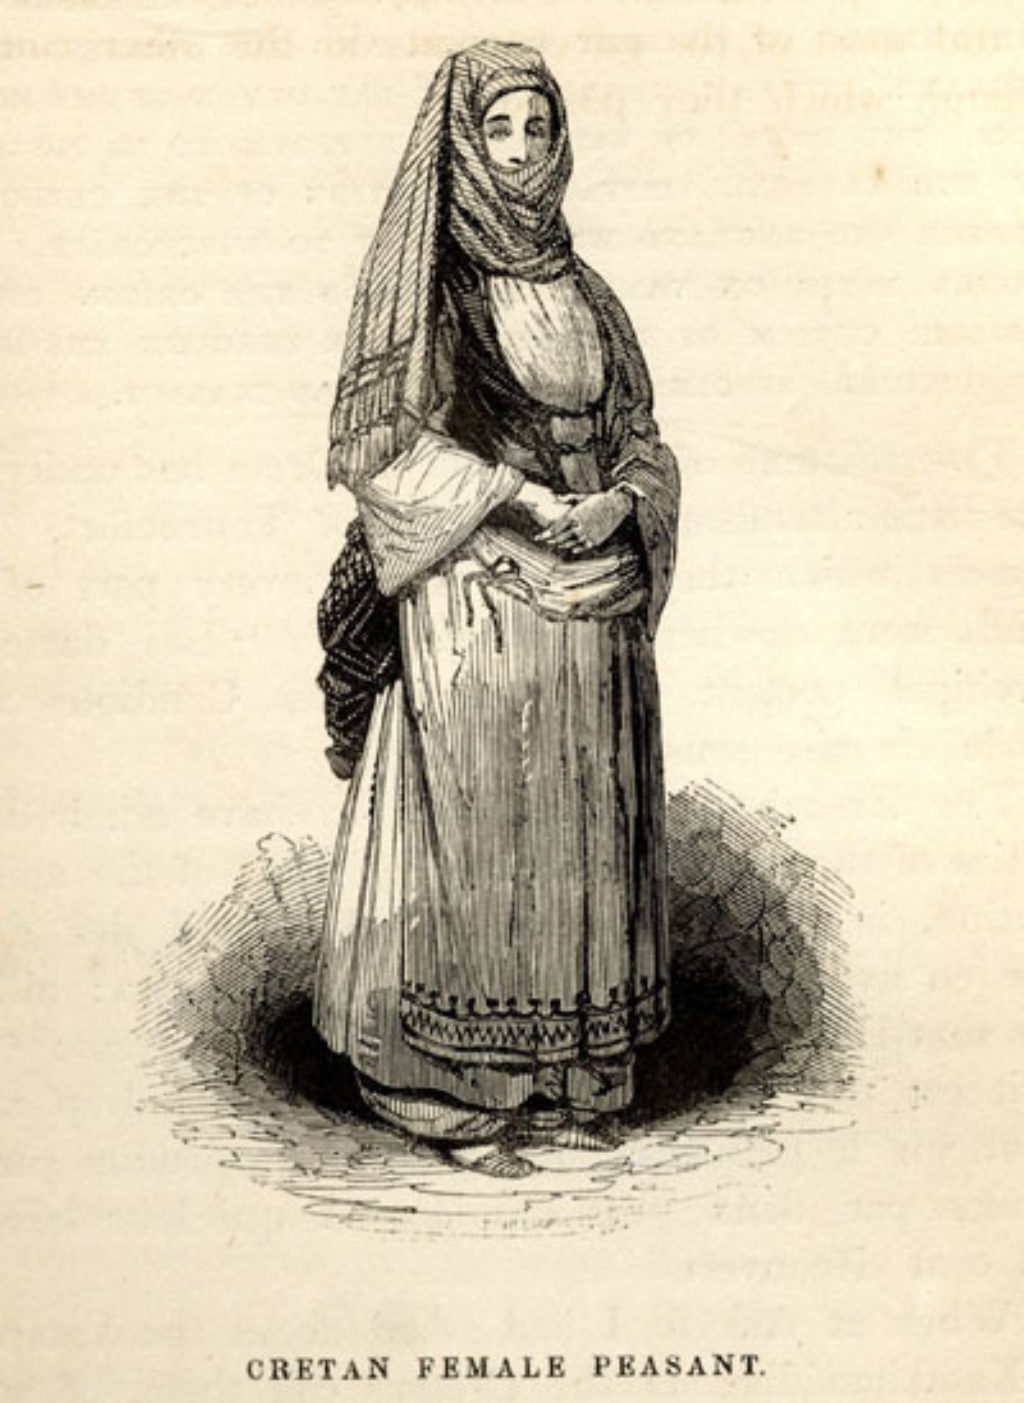 One of the few depictions of a Cretan woman in the early 19th century (R. Pashley, 1834)